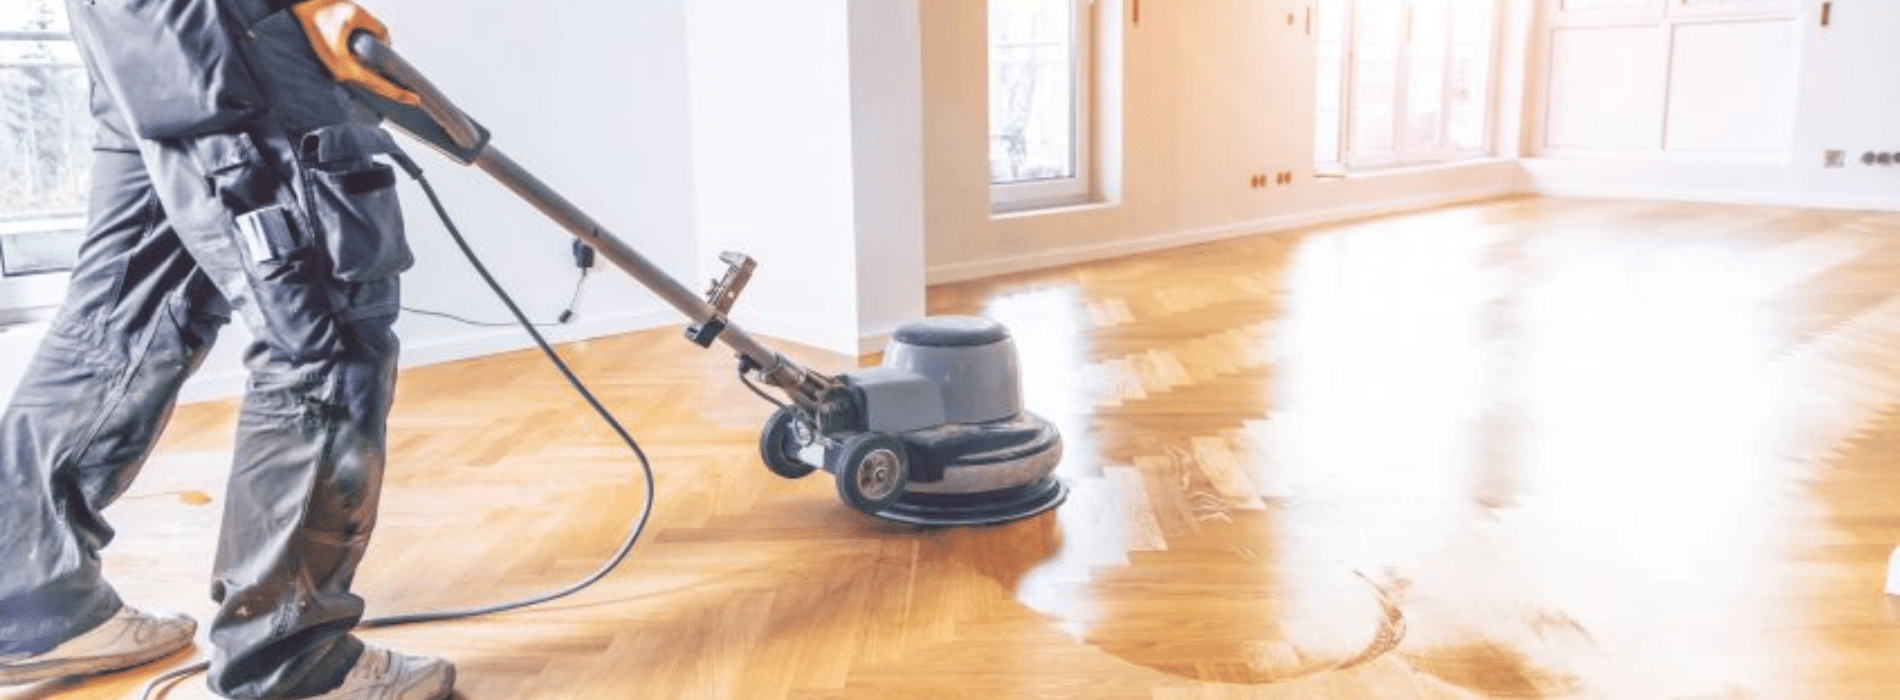 In Isleworth, TW7, Mr Sander® use the Bona FlexiSand 1.5 buffer sander (Ø 407 mm, 1.5 kW) on a parquet floor. The sander operates at 230V with a frequency of 50 Hz/60 Hz. It is connected to a dust extraction system with a HEPA filter, ensuring a clean and efficient sanding process.